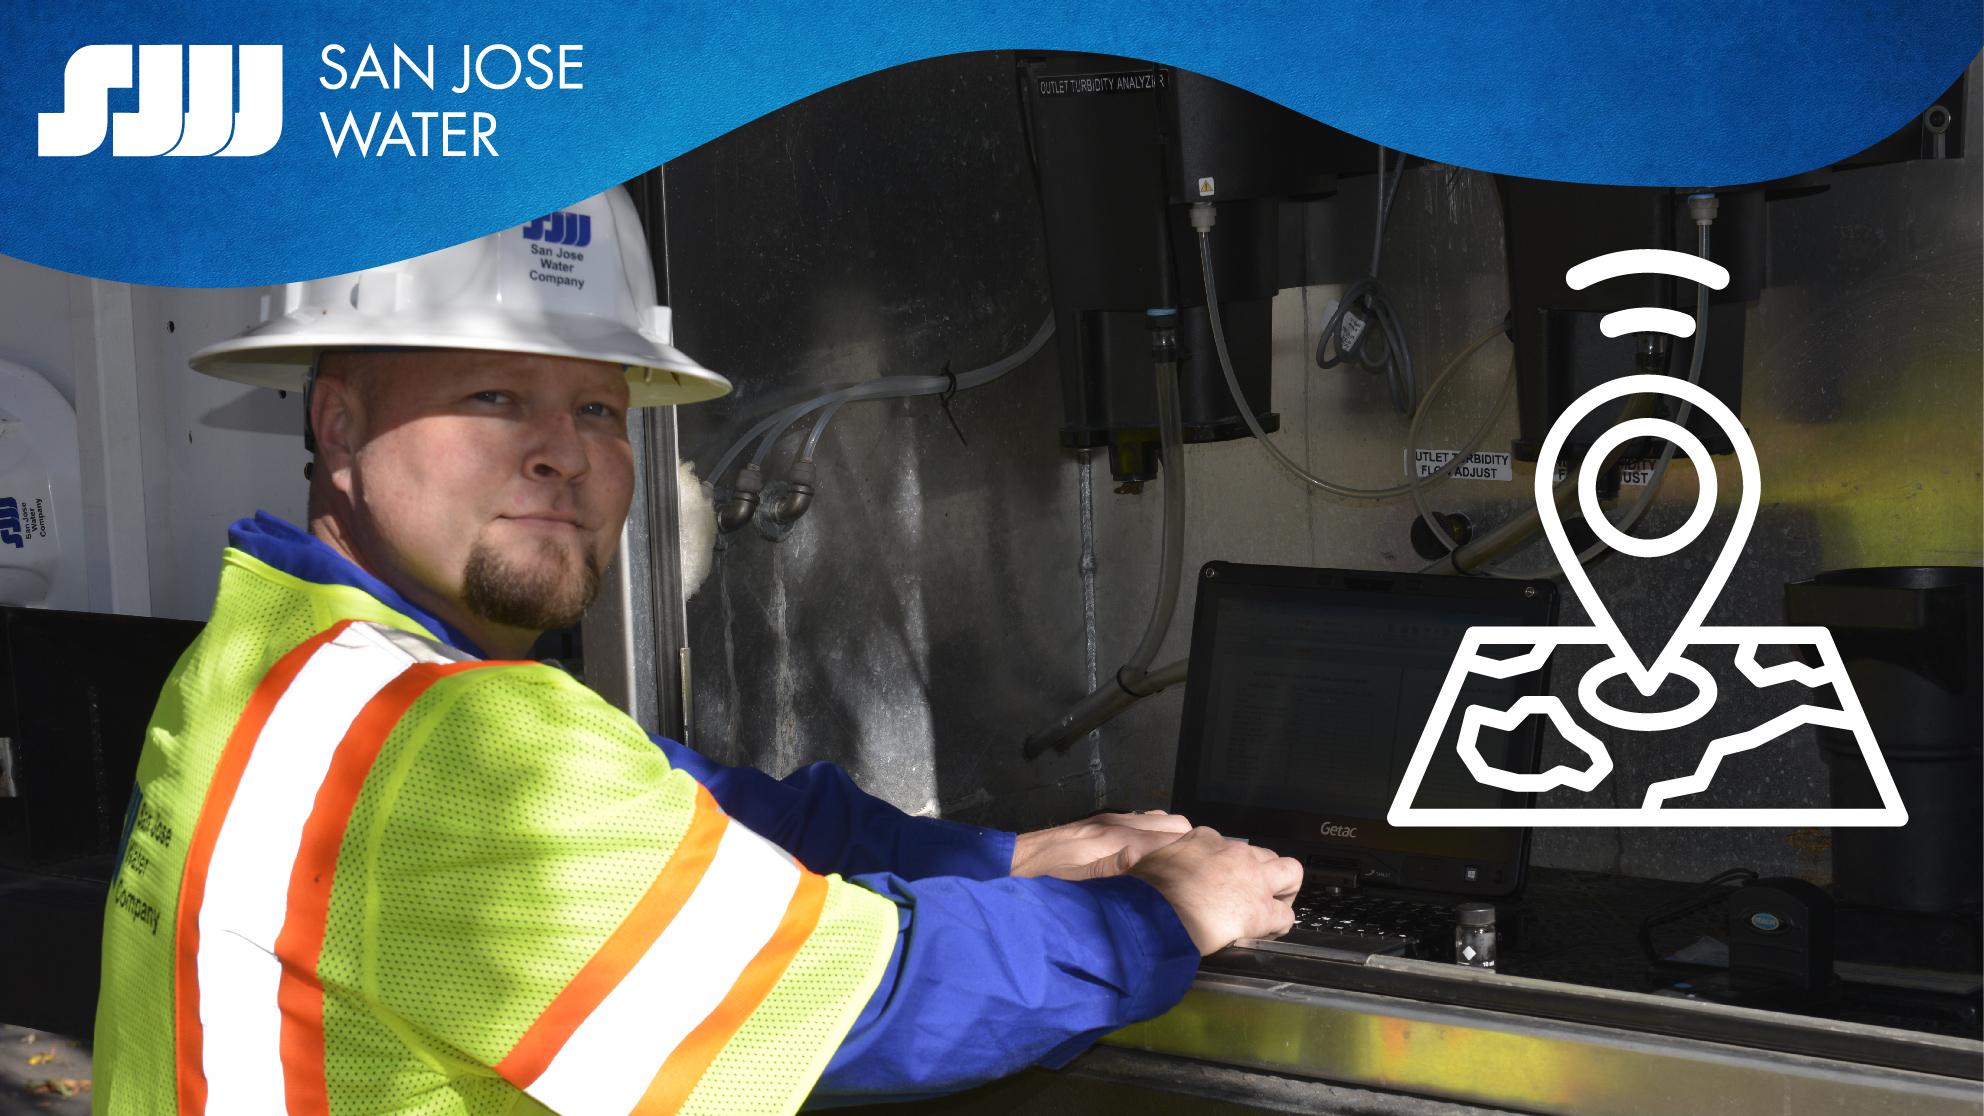 San Jose Water field employee with gps icon